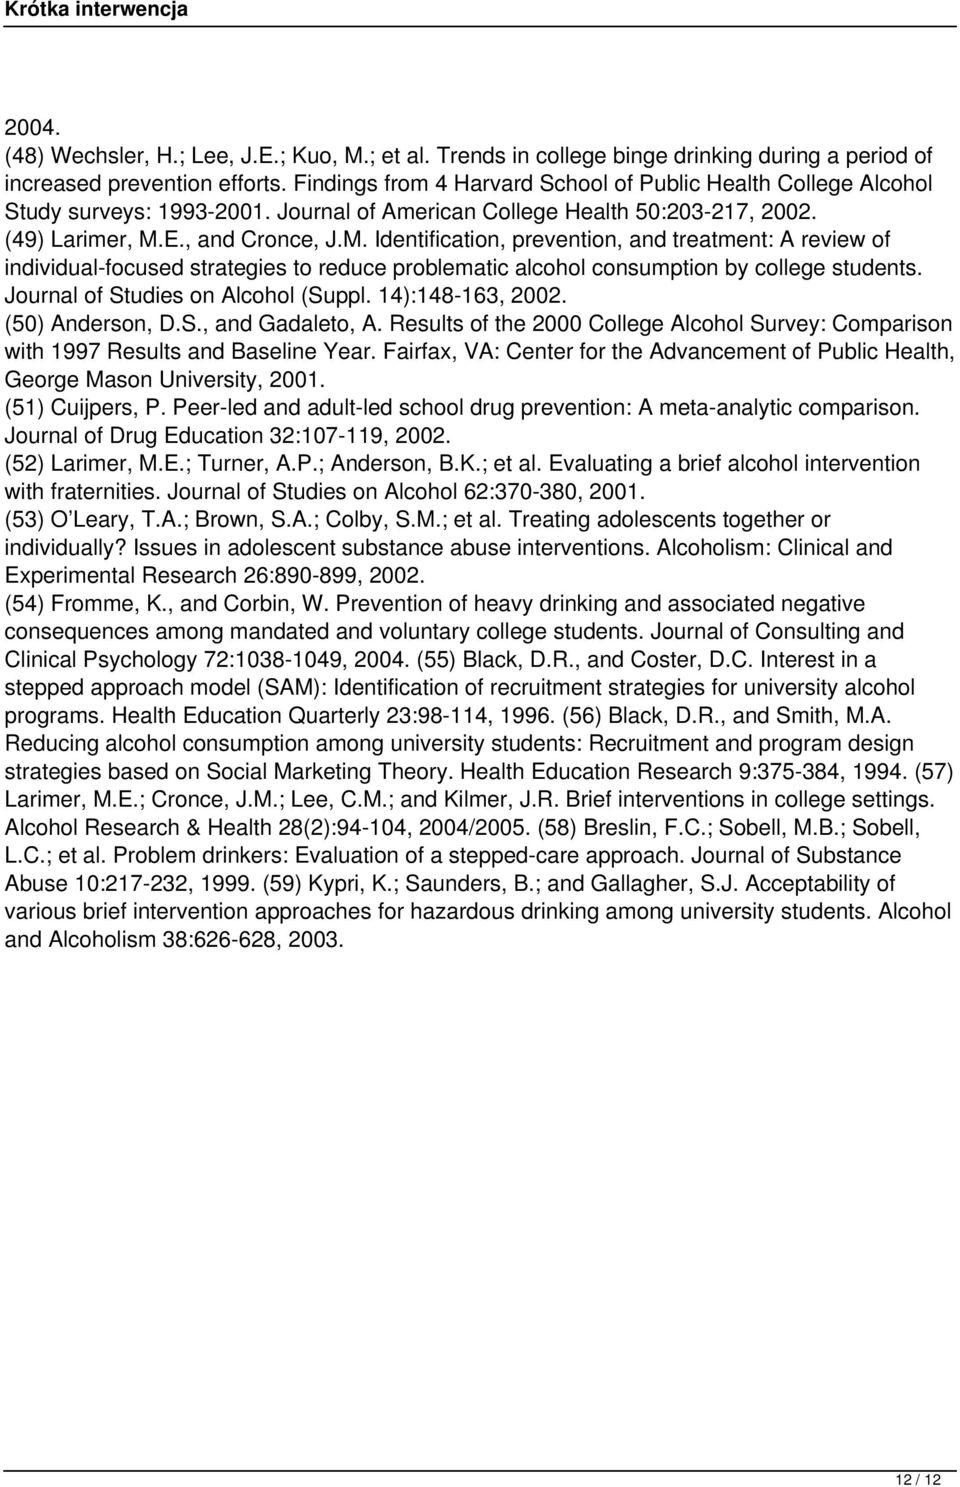 E., and Cronce, J.M. Identification, prevention, and treatment: A review of individual-focused strategies to reduce problematic alcohol consumption by college students.